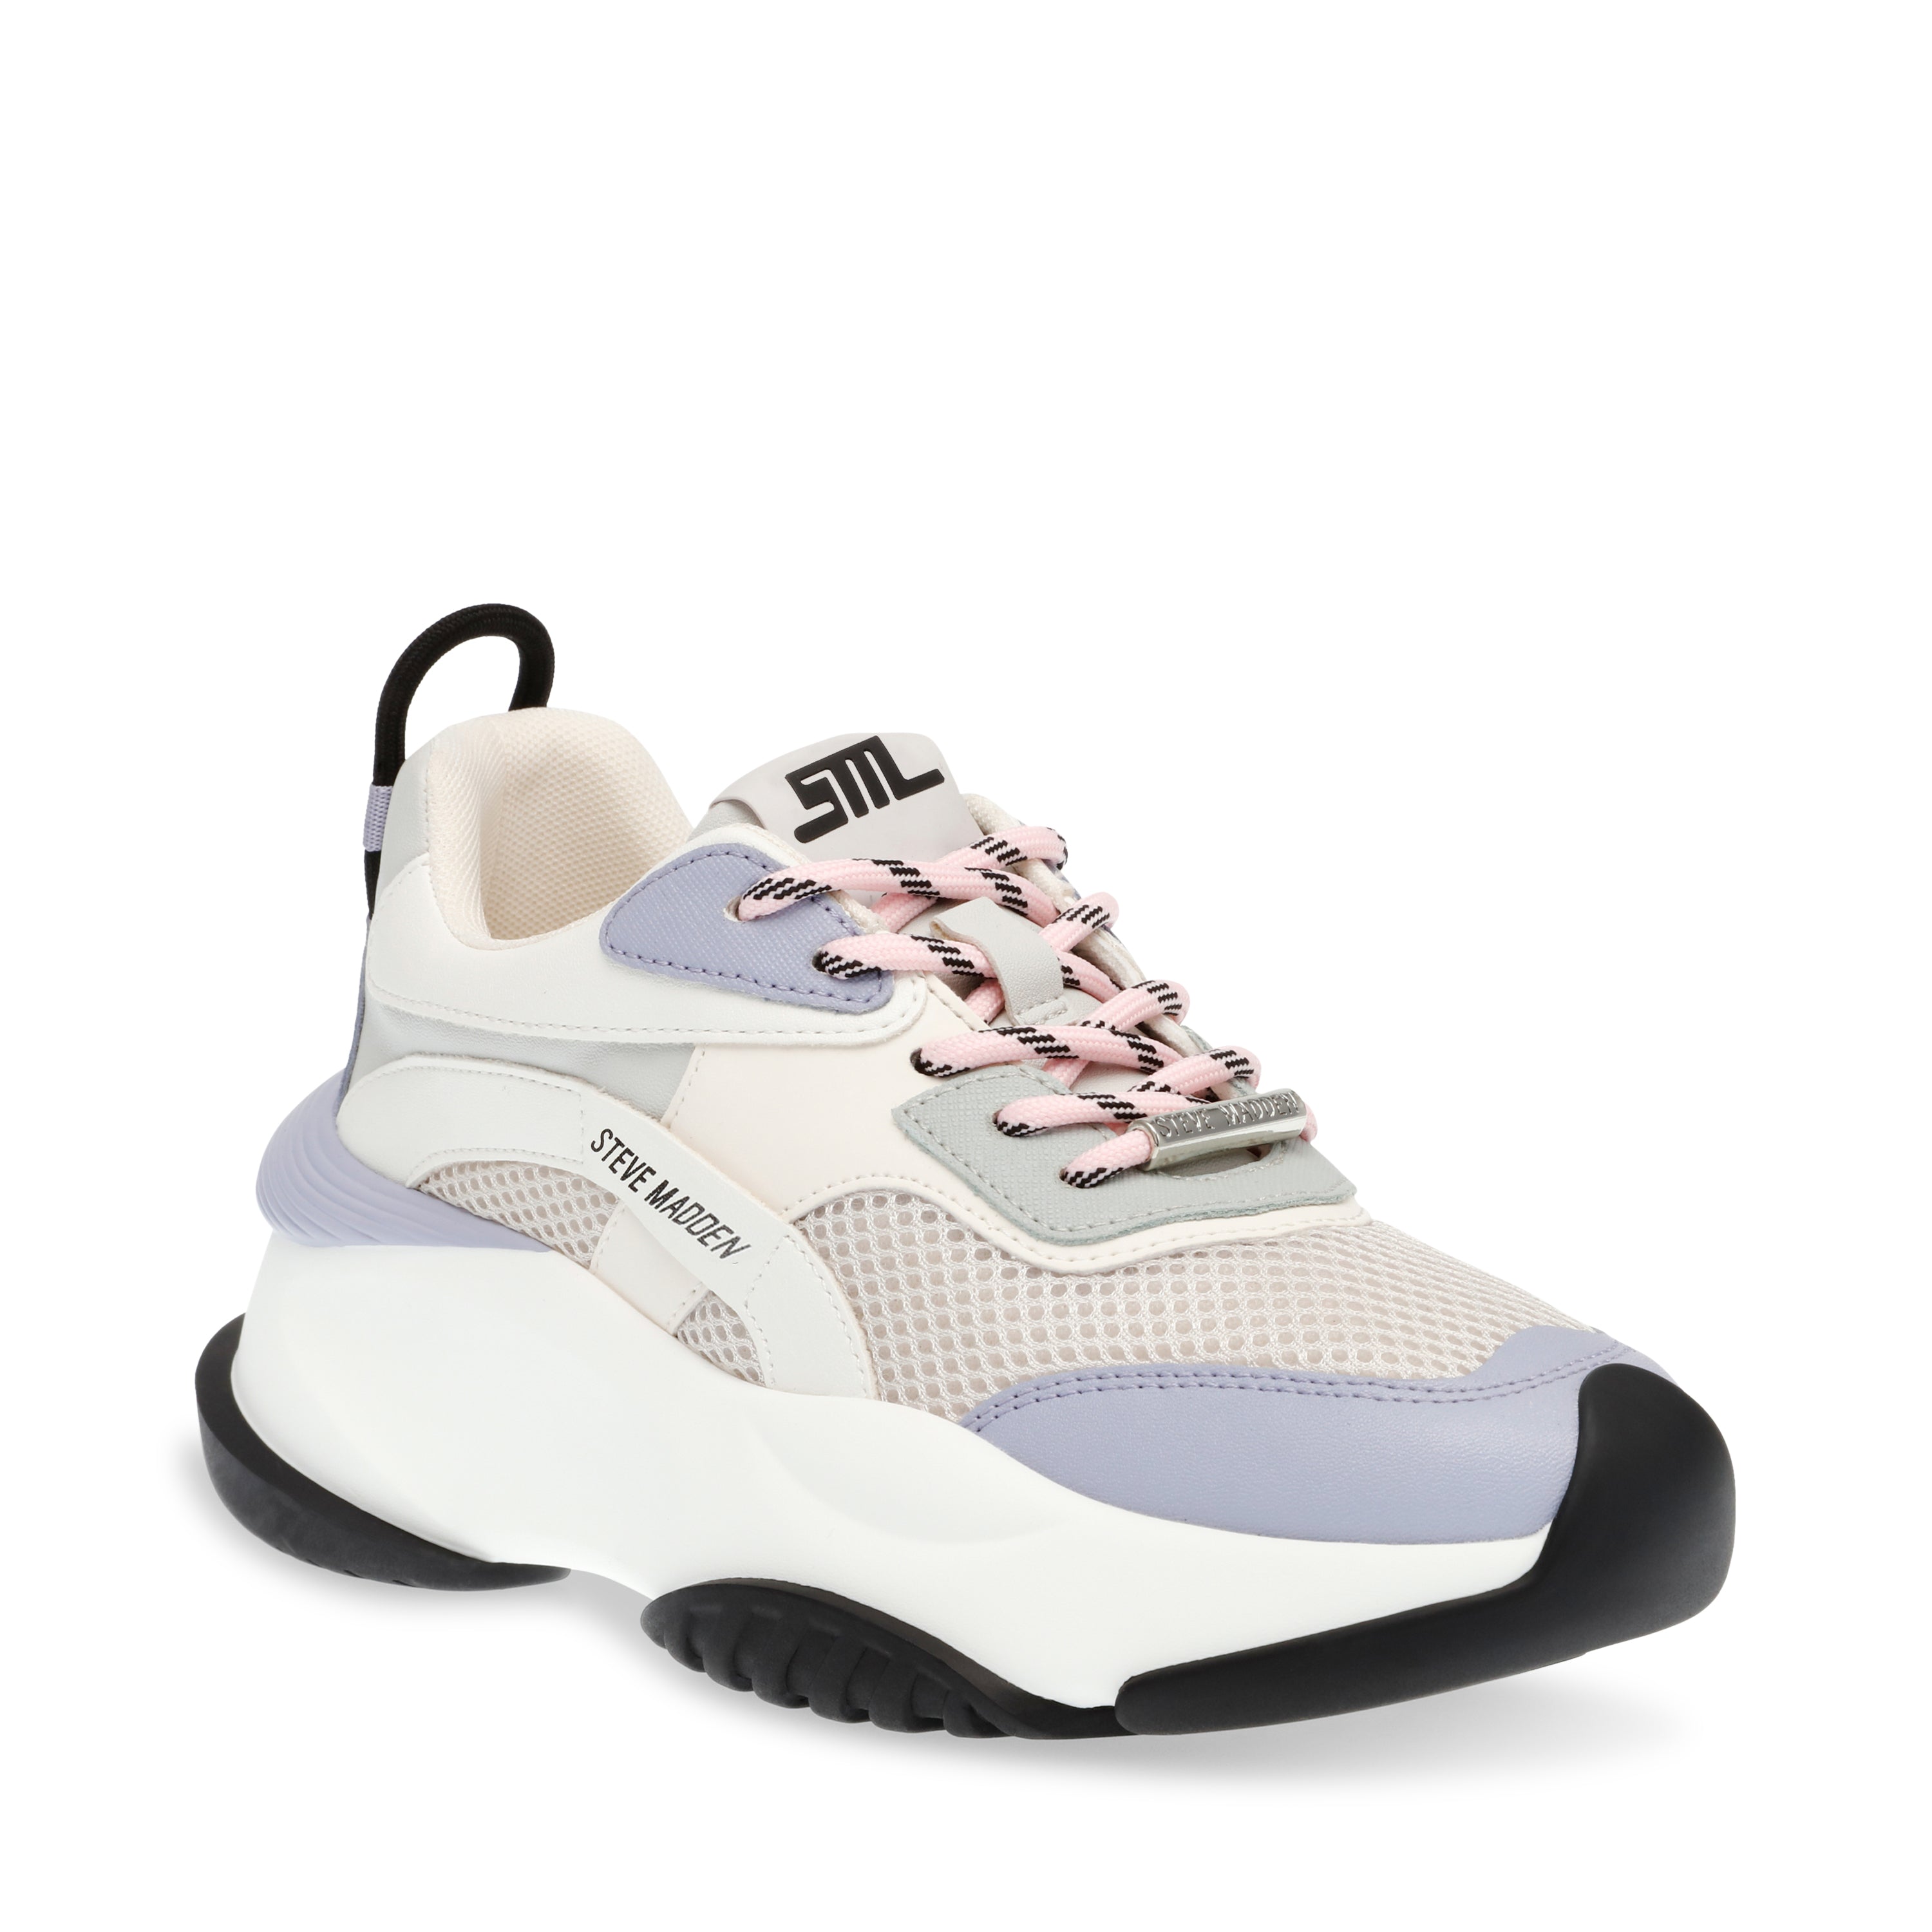 BELISSIMO GREY/LAVENDER SNEAKERS- Hover Image